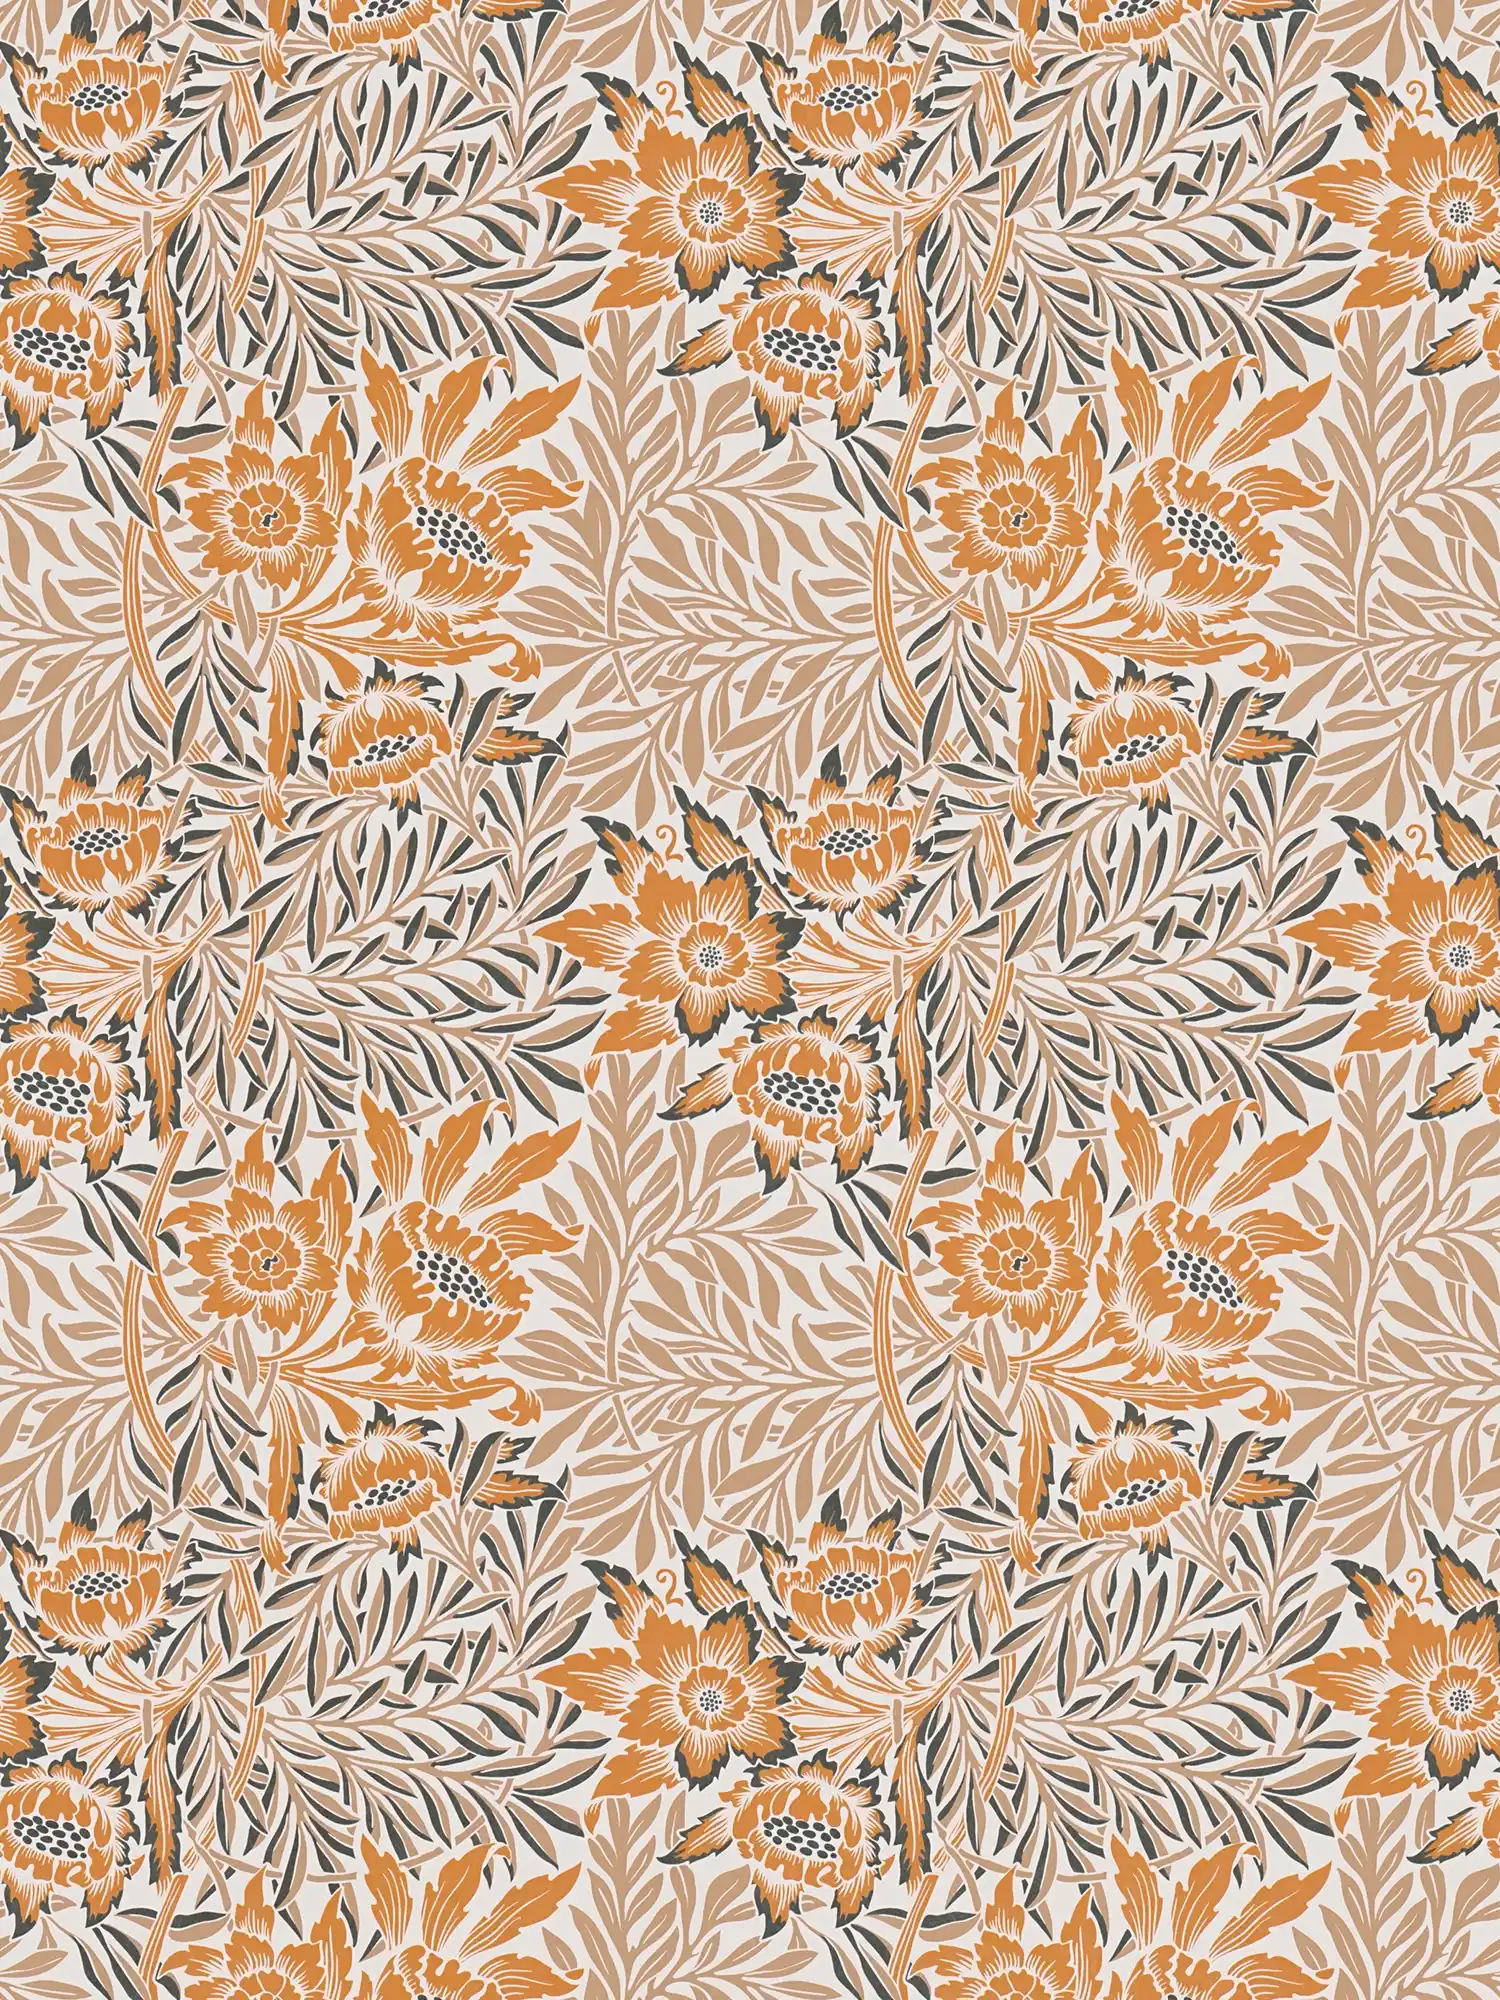 Non-woven wallpaper with flowers and leaf tendrils - orange, beige, white
